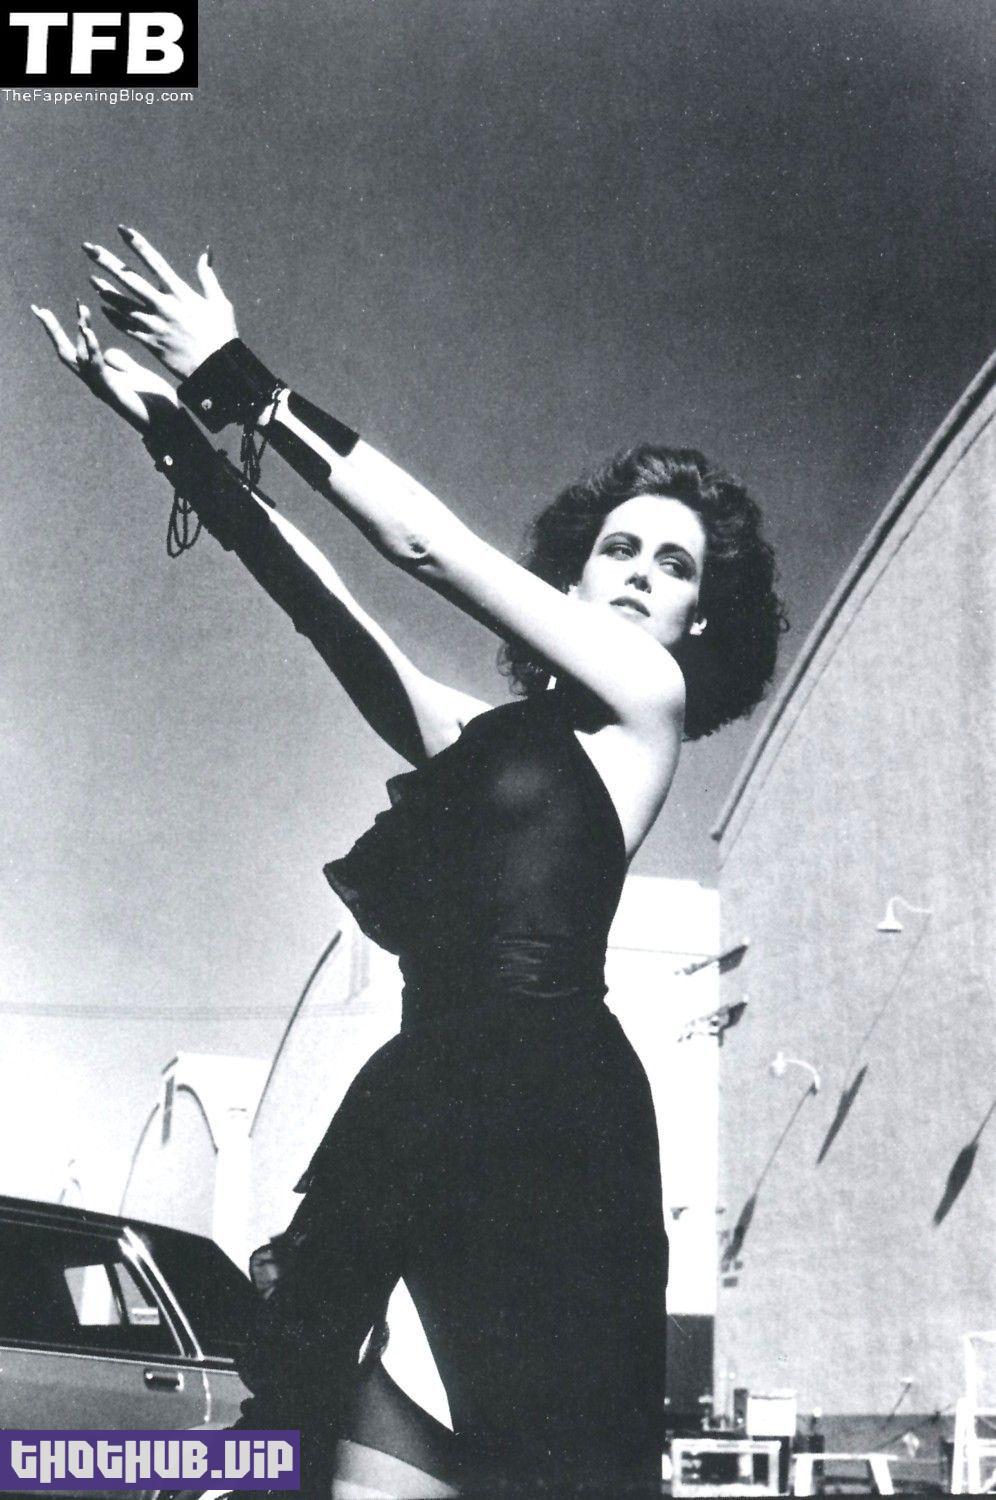 Best Sigourney Weaver See Through and Sexy (6 Photos) On Thothub